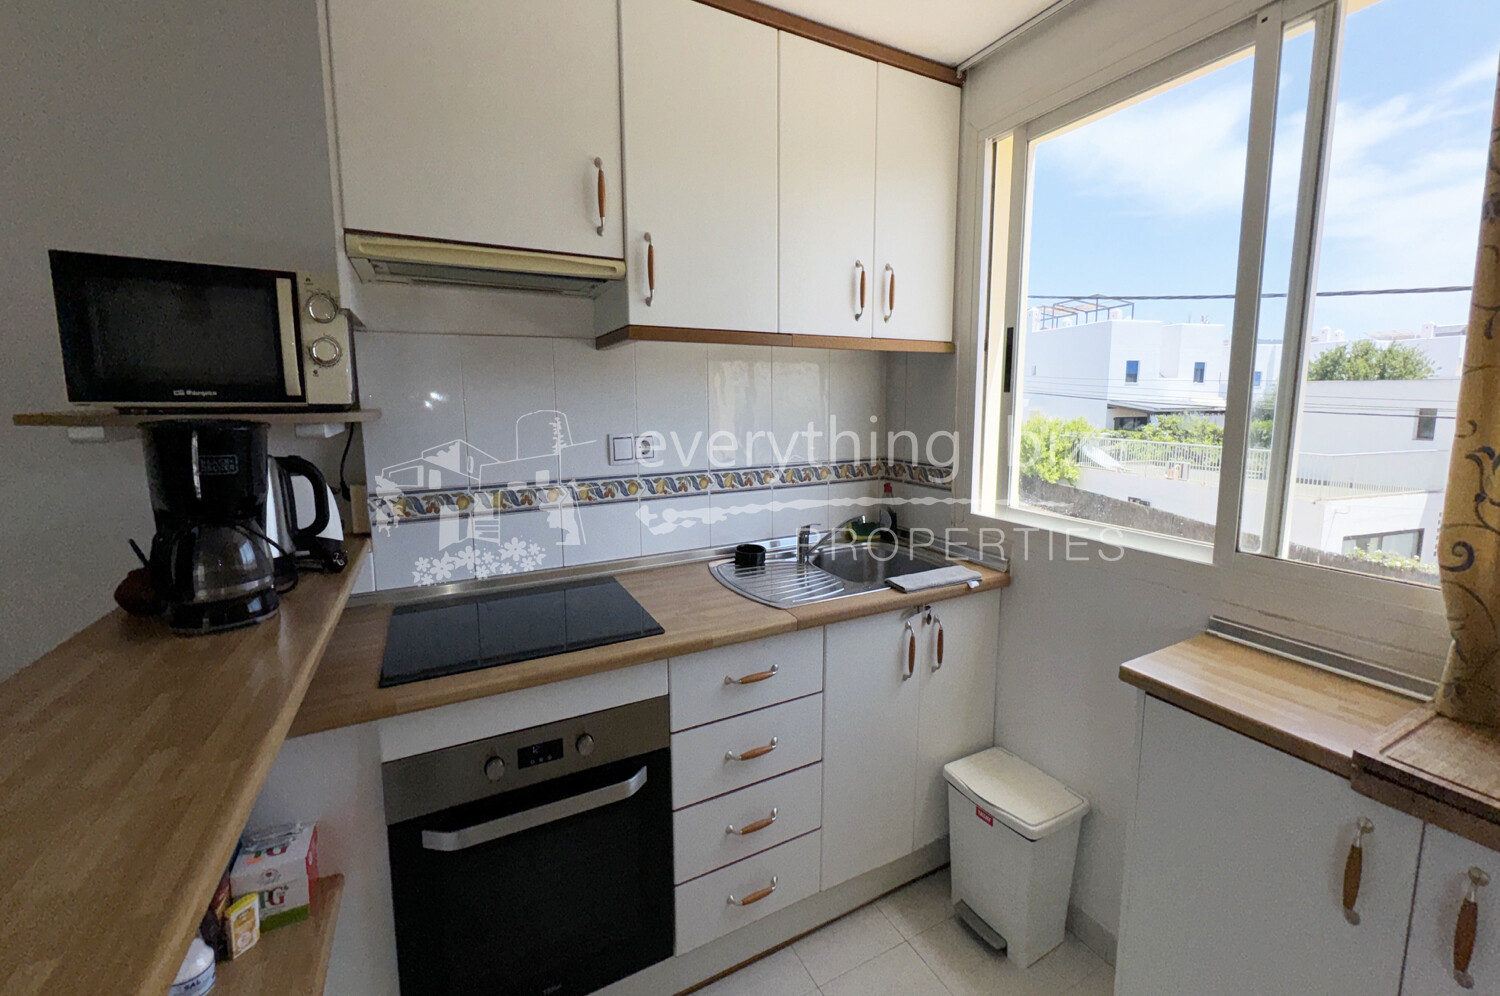 Lovely Modern 2 Bedroomed Furnished Apartment Close to the Sea and Beaches, ref. 1710, for sale in Ibiza by everything ibiza Properties